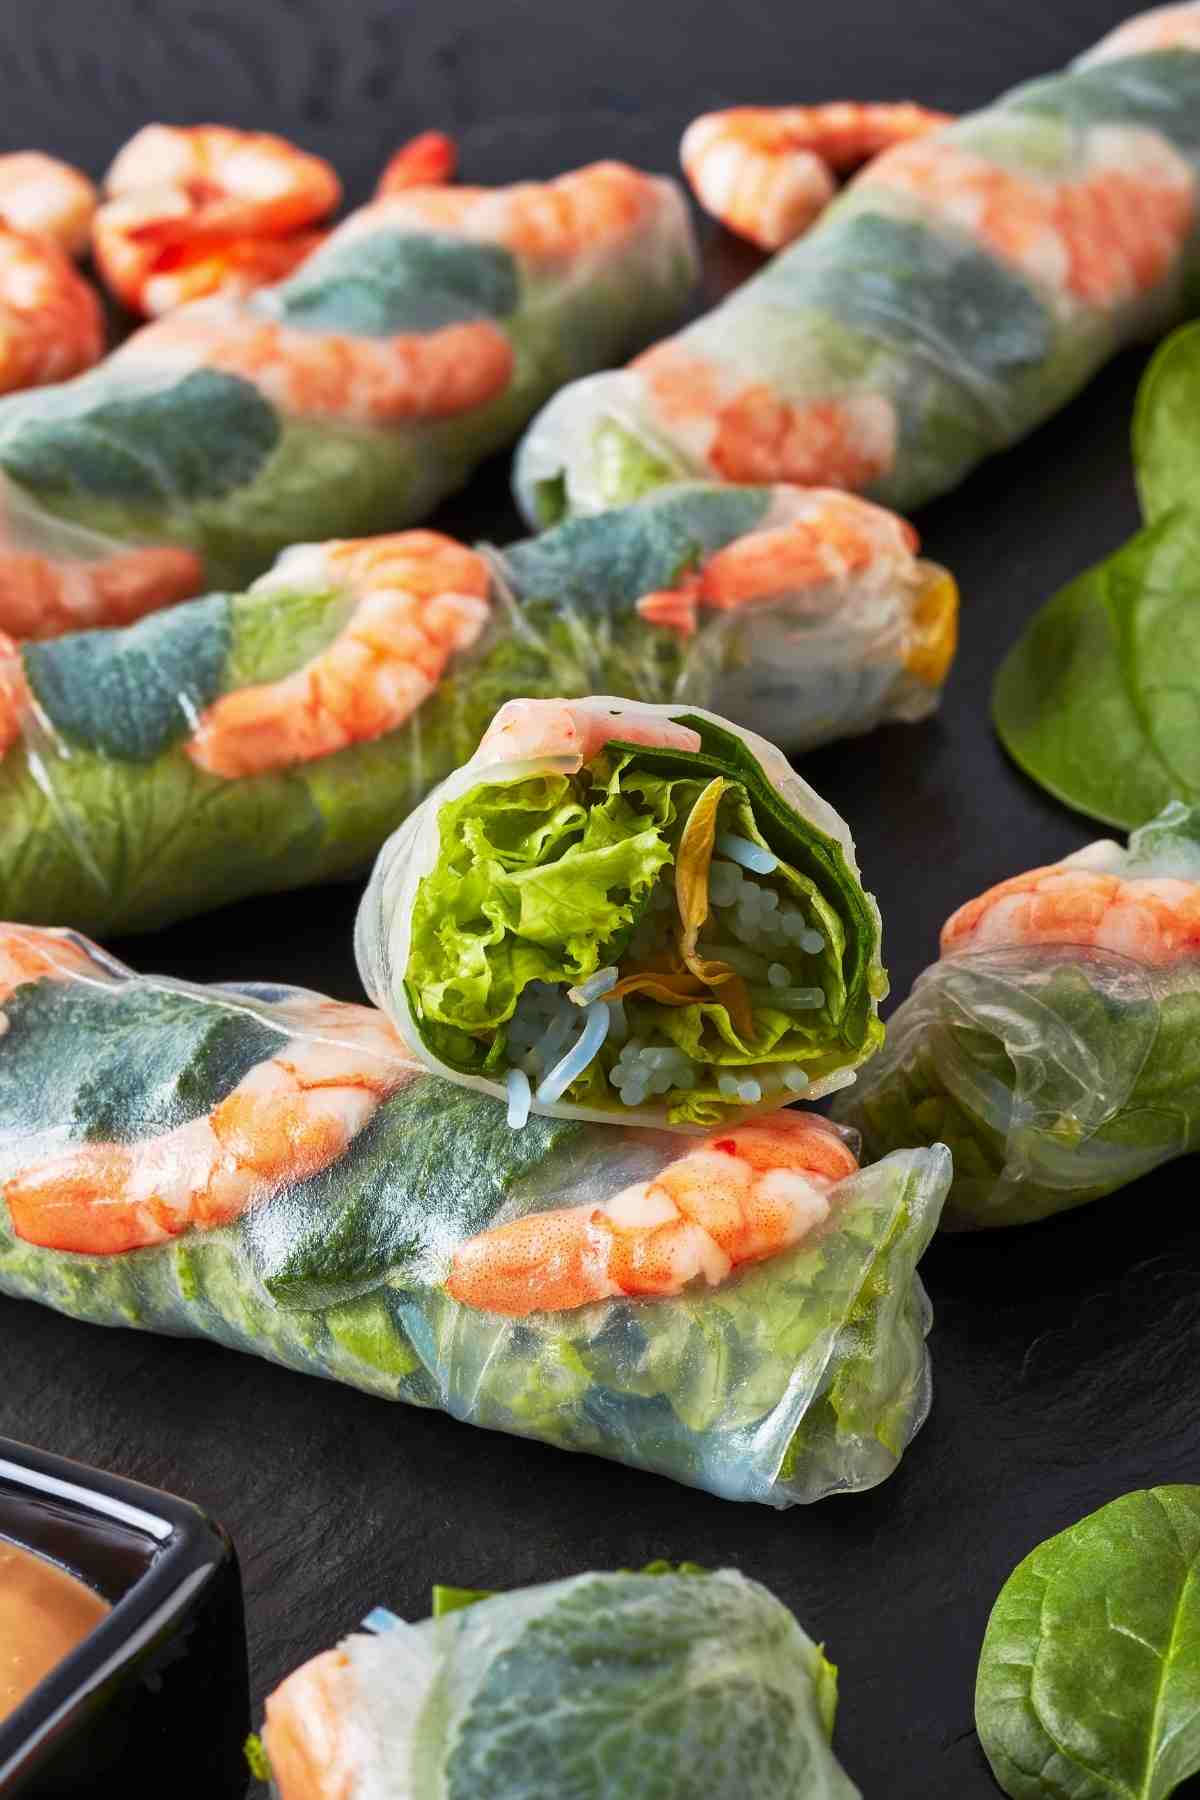 Enjoy shrimp and fresh veggies enrobed in rice paper and dipped in a tangy peanut sauce when you try these delicious rice paper rolls. Whether you serve them as an appetizer or enjoy them for lunch, rice paper rolls always hit the spot.